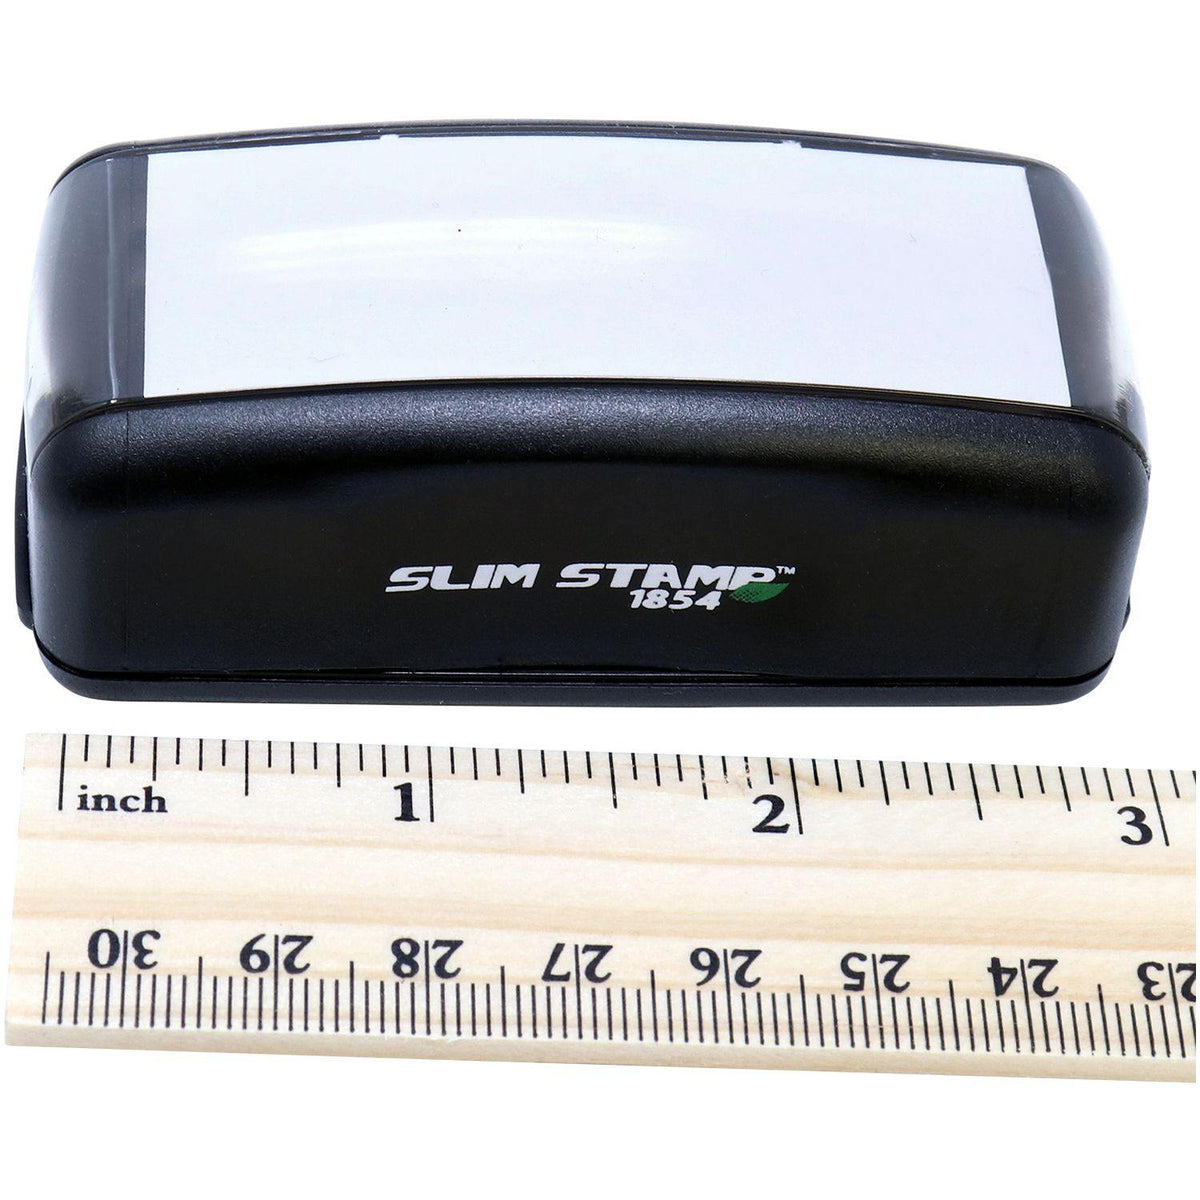 Measurement Large Pre-Inked Essential Job Stamp with Ruler